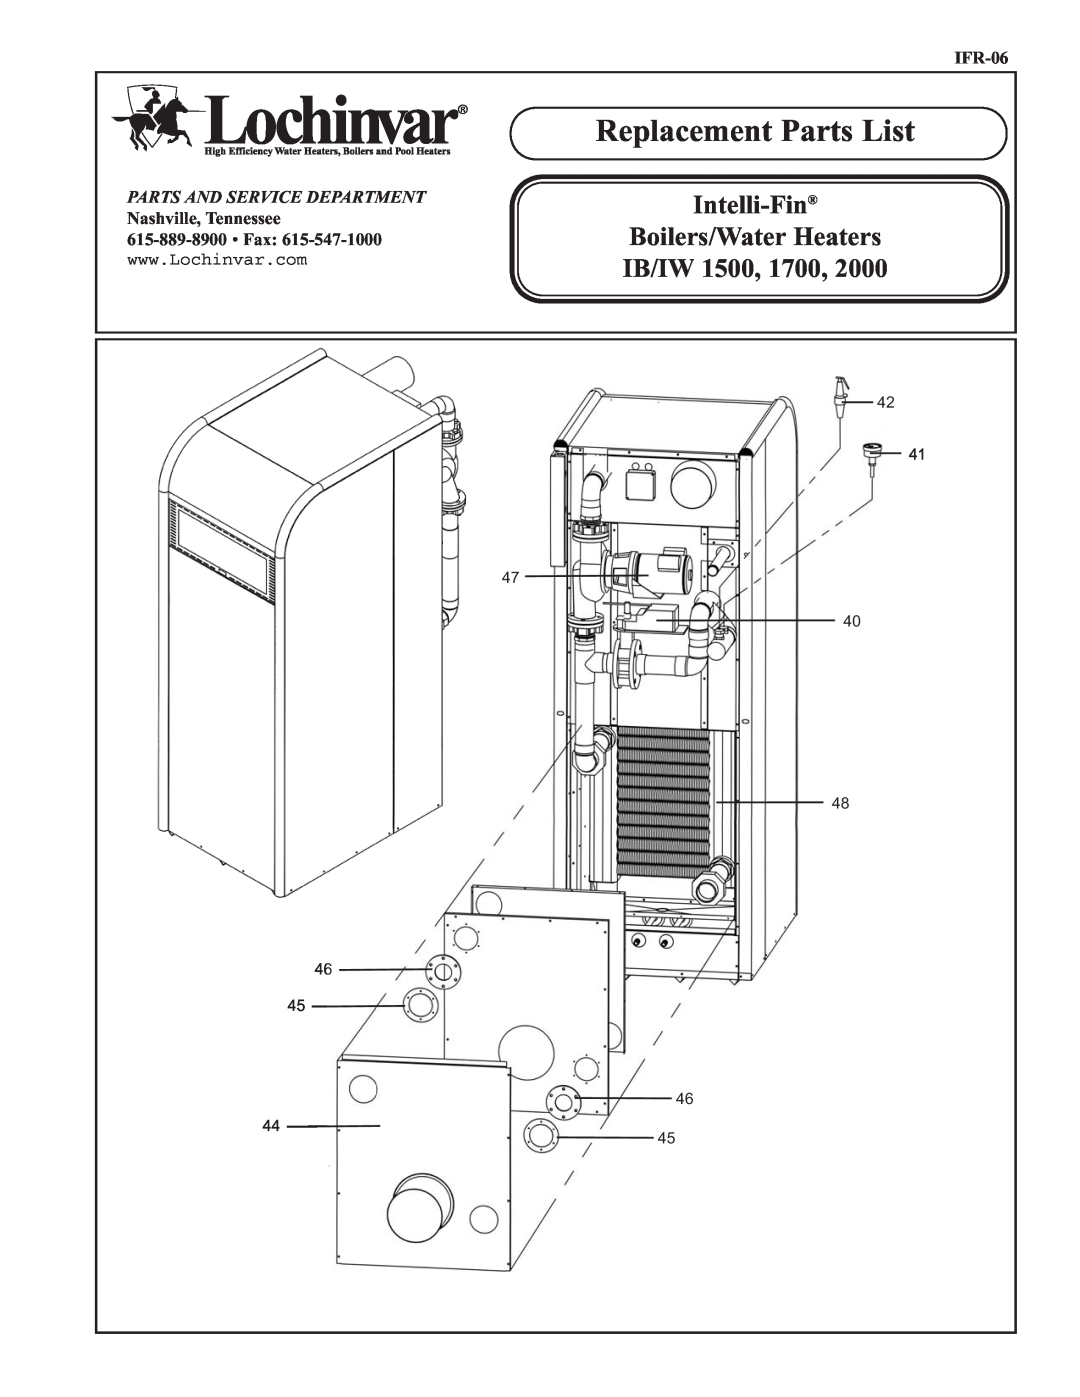 Lochinvar IB 1500 manual Replacement Parts List, Ib/Iw, Intelli-Fin, Boilers/Water Heaters, IFR-06, Nashville, Tennessee 